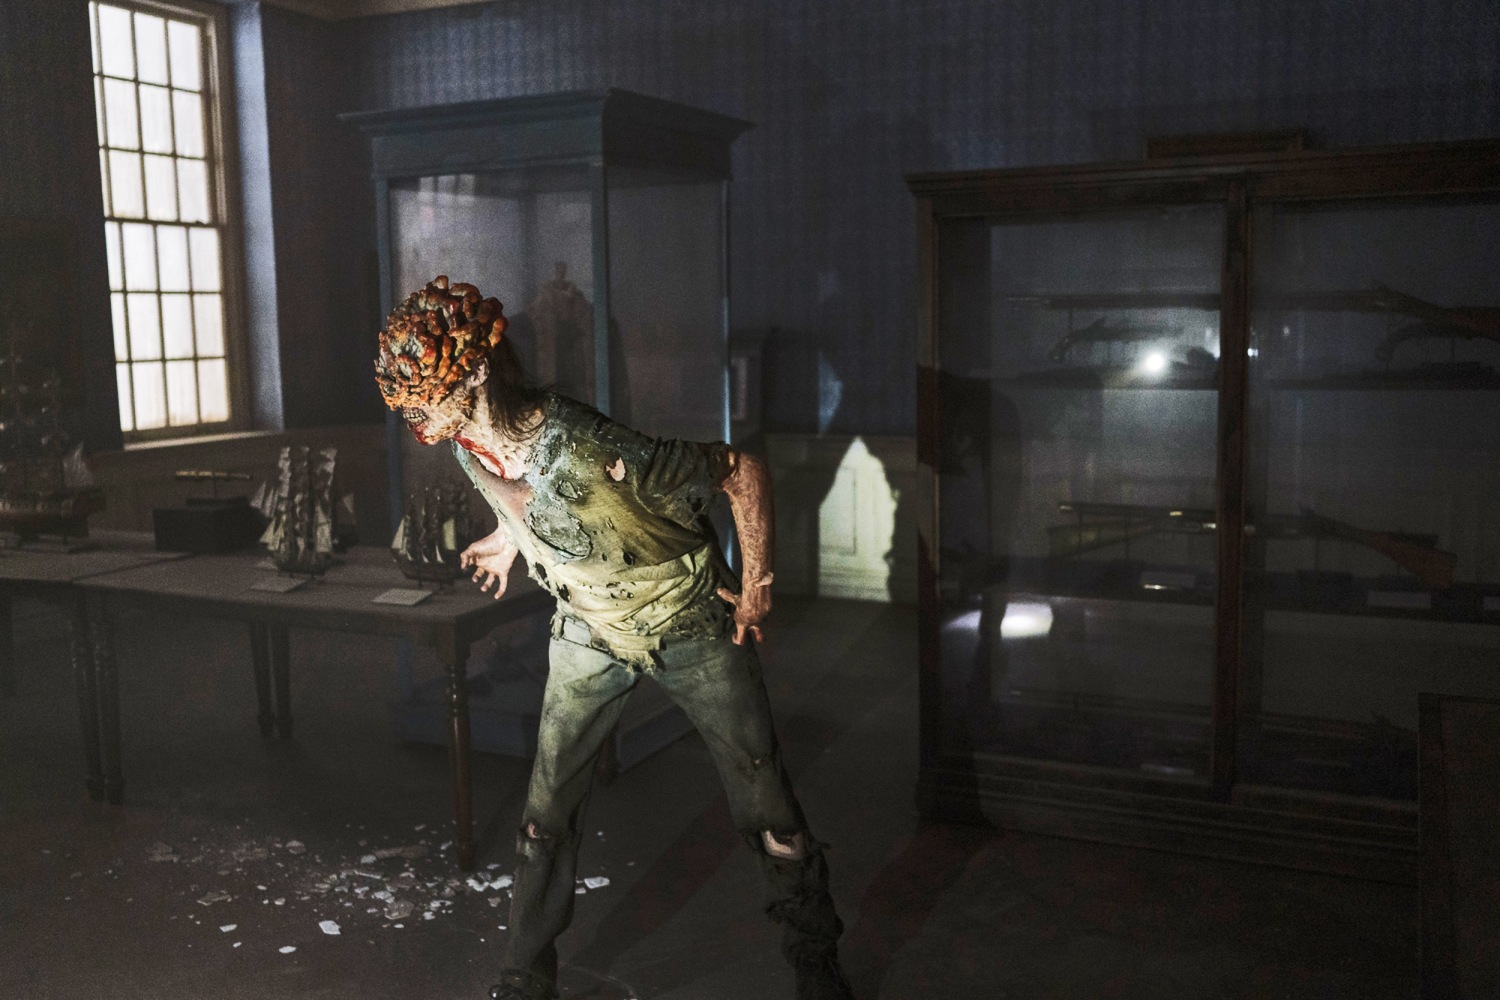 Zombie apocalypse: Fungus creating havoc in The Last of Us exists in real